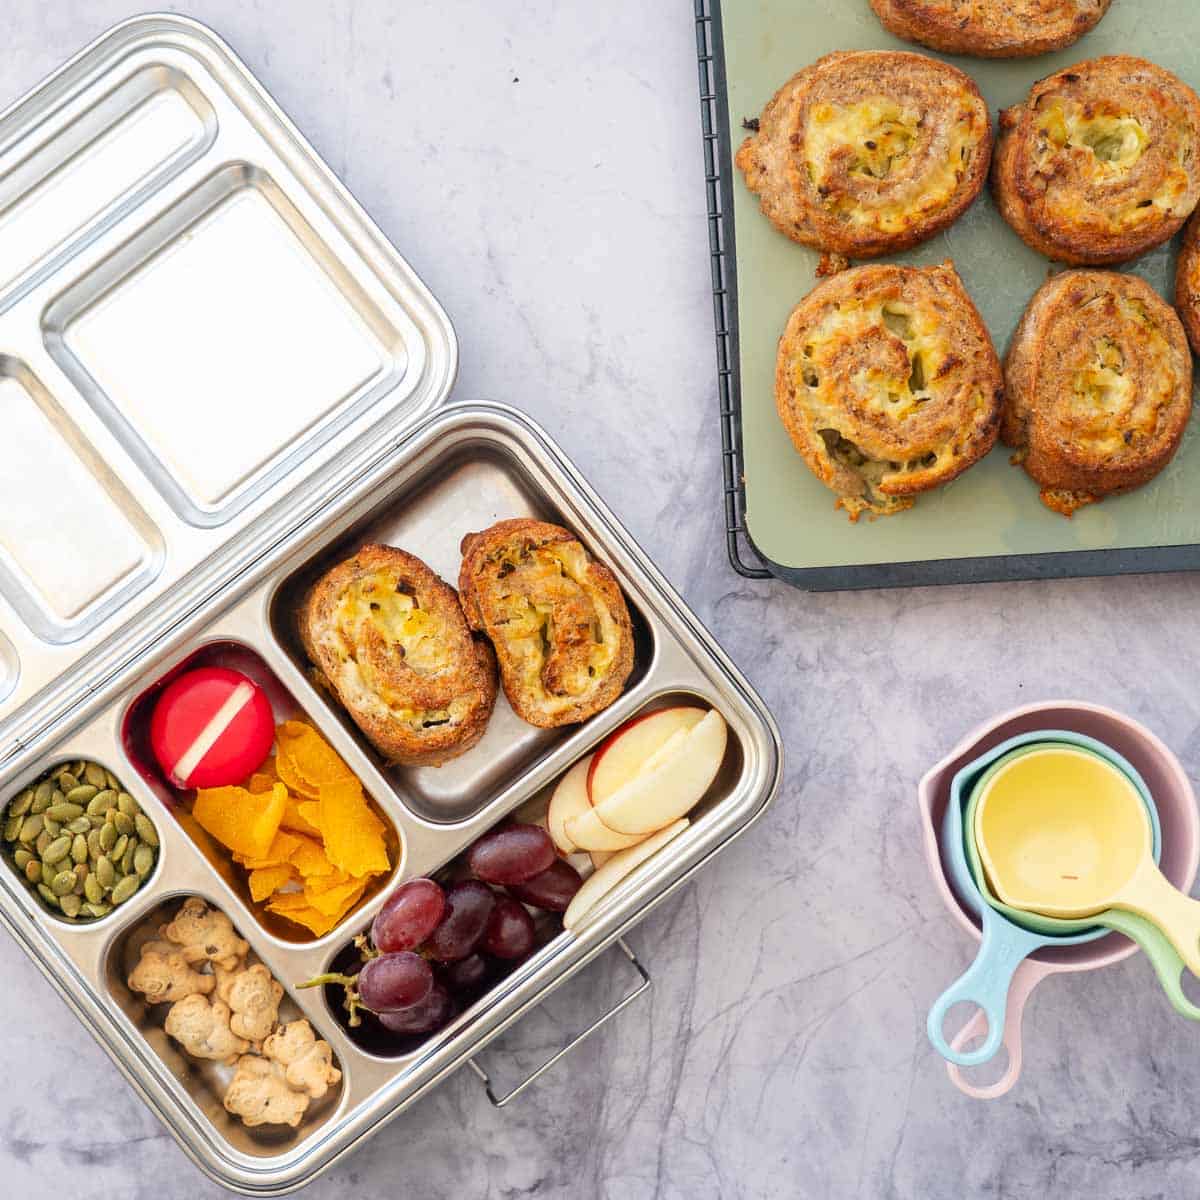 A stainless steel lunch box packed with leek scrolls, fruit, vegetables, cheese and crackers.